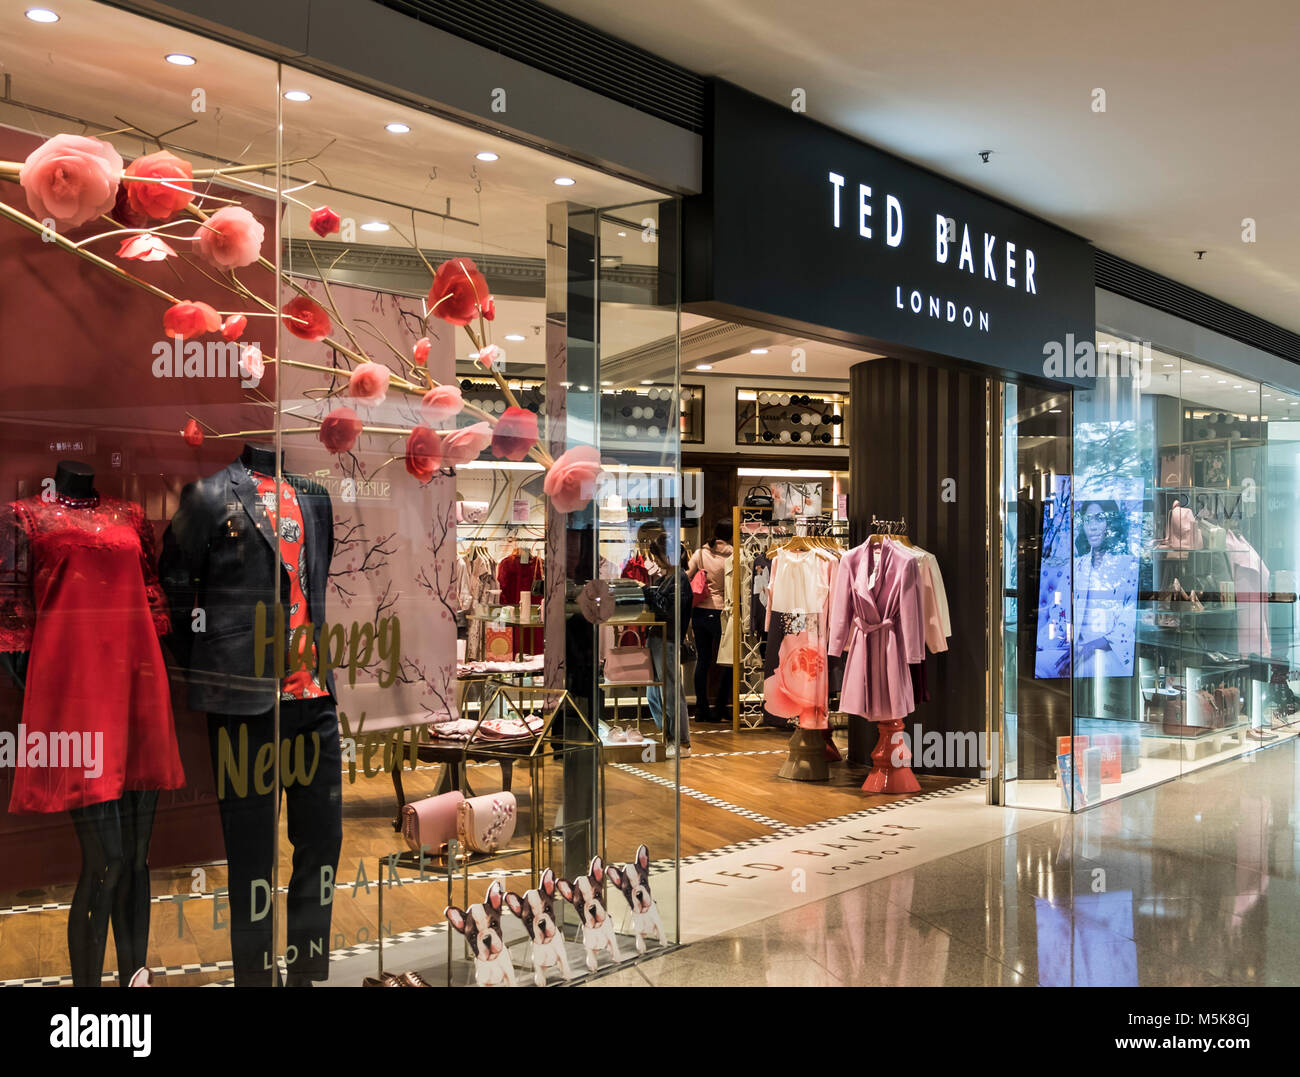 Ted Baker Boutique High Resolution Stock Photography and Images - Alamy